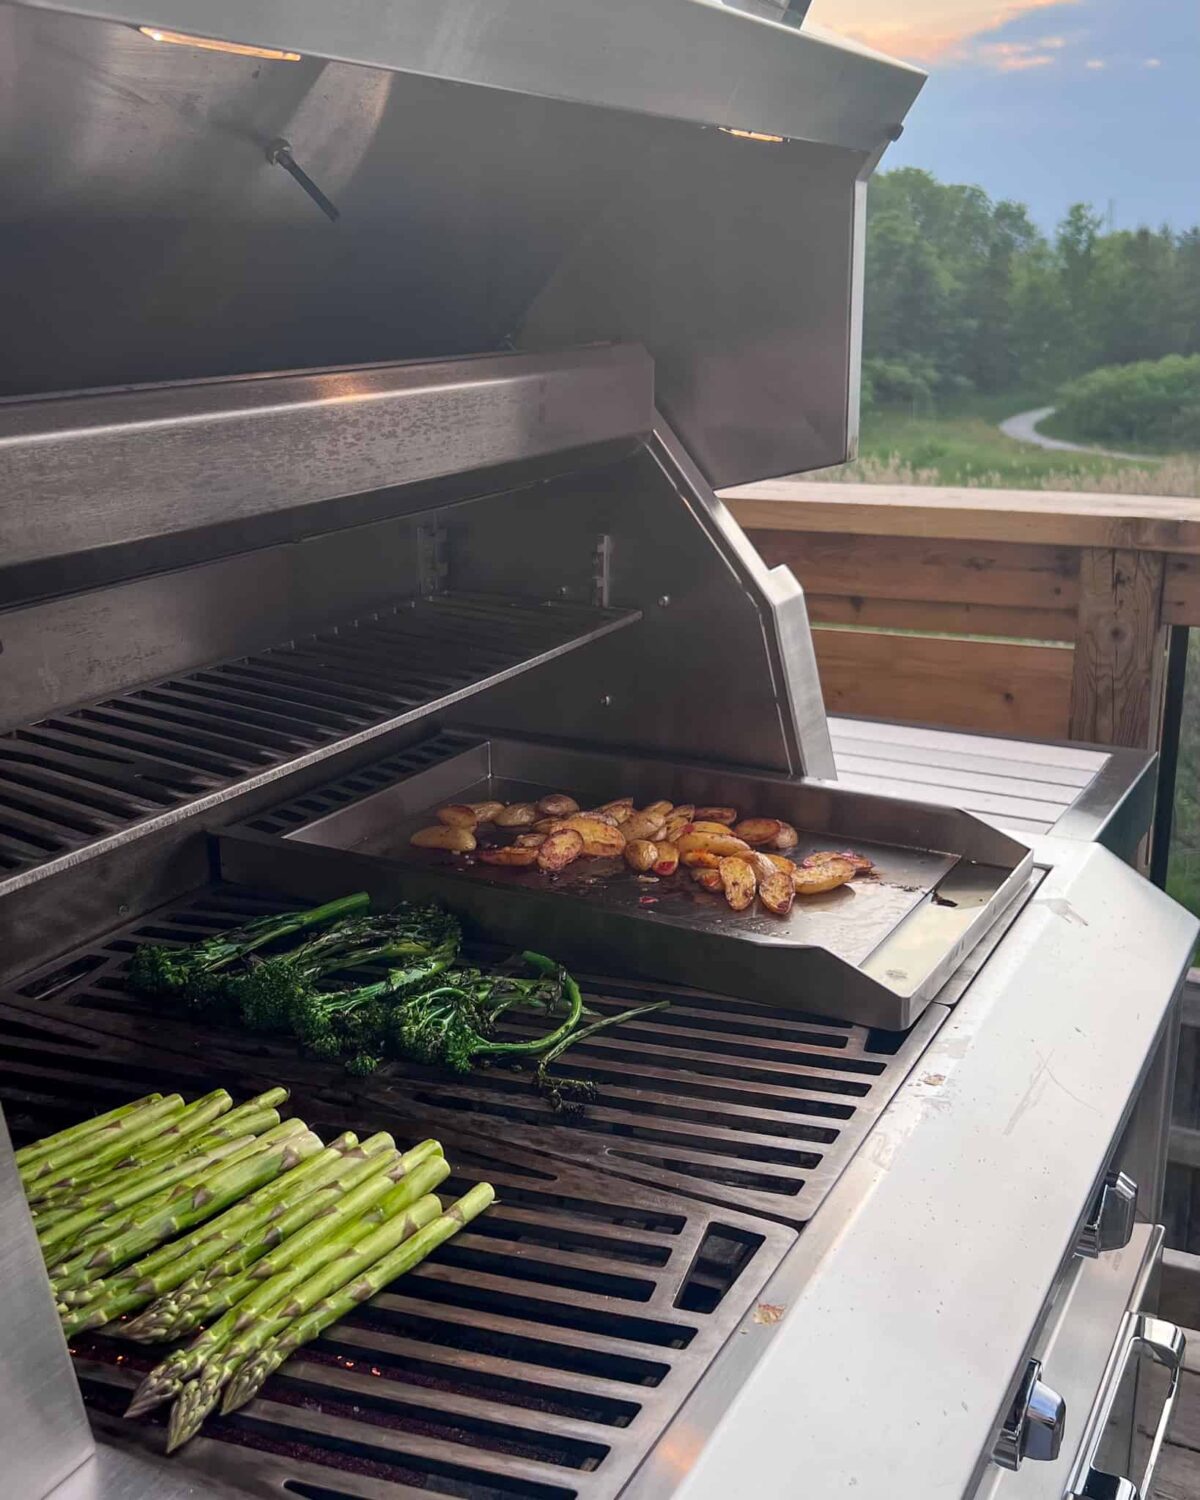 Asparagus and broccolini on the grill with roasted potatoes on the griddle.